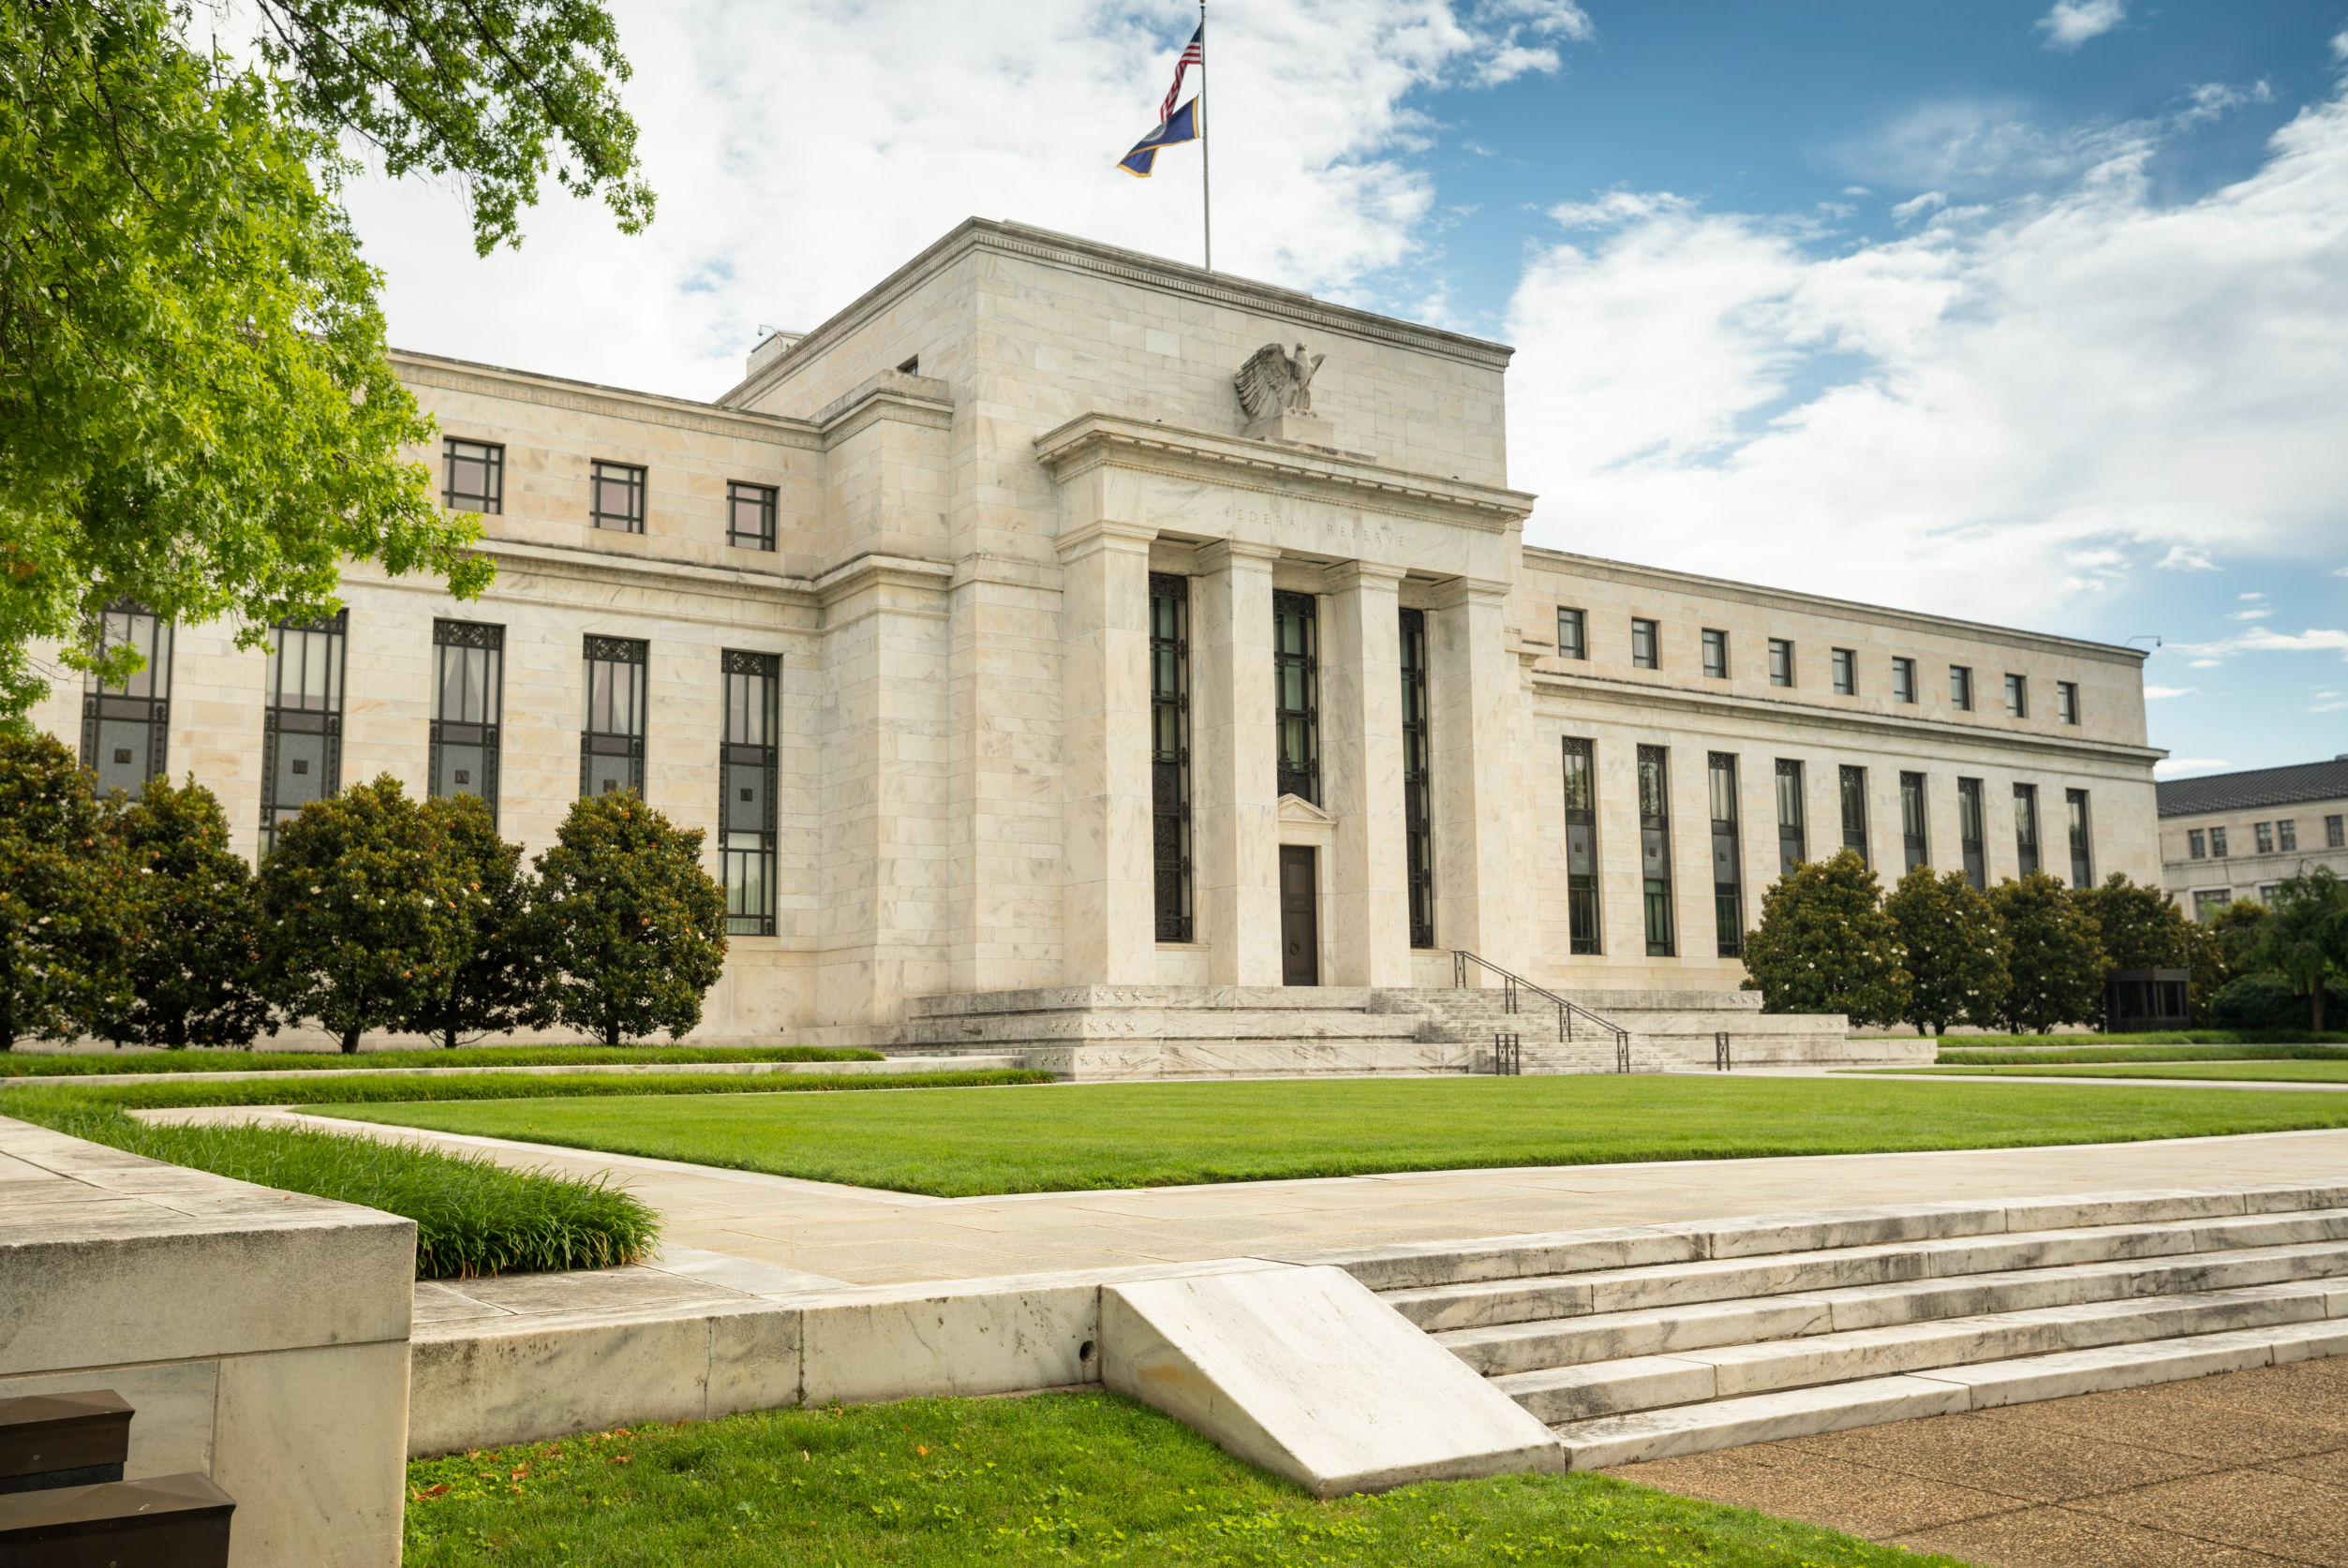 Analysts’ outlook on the Fed ahead of the US nonfarm payrolls data